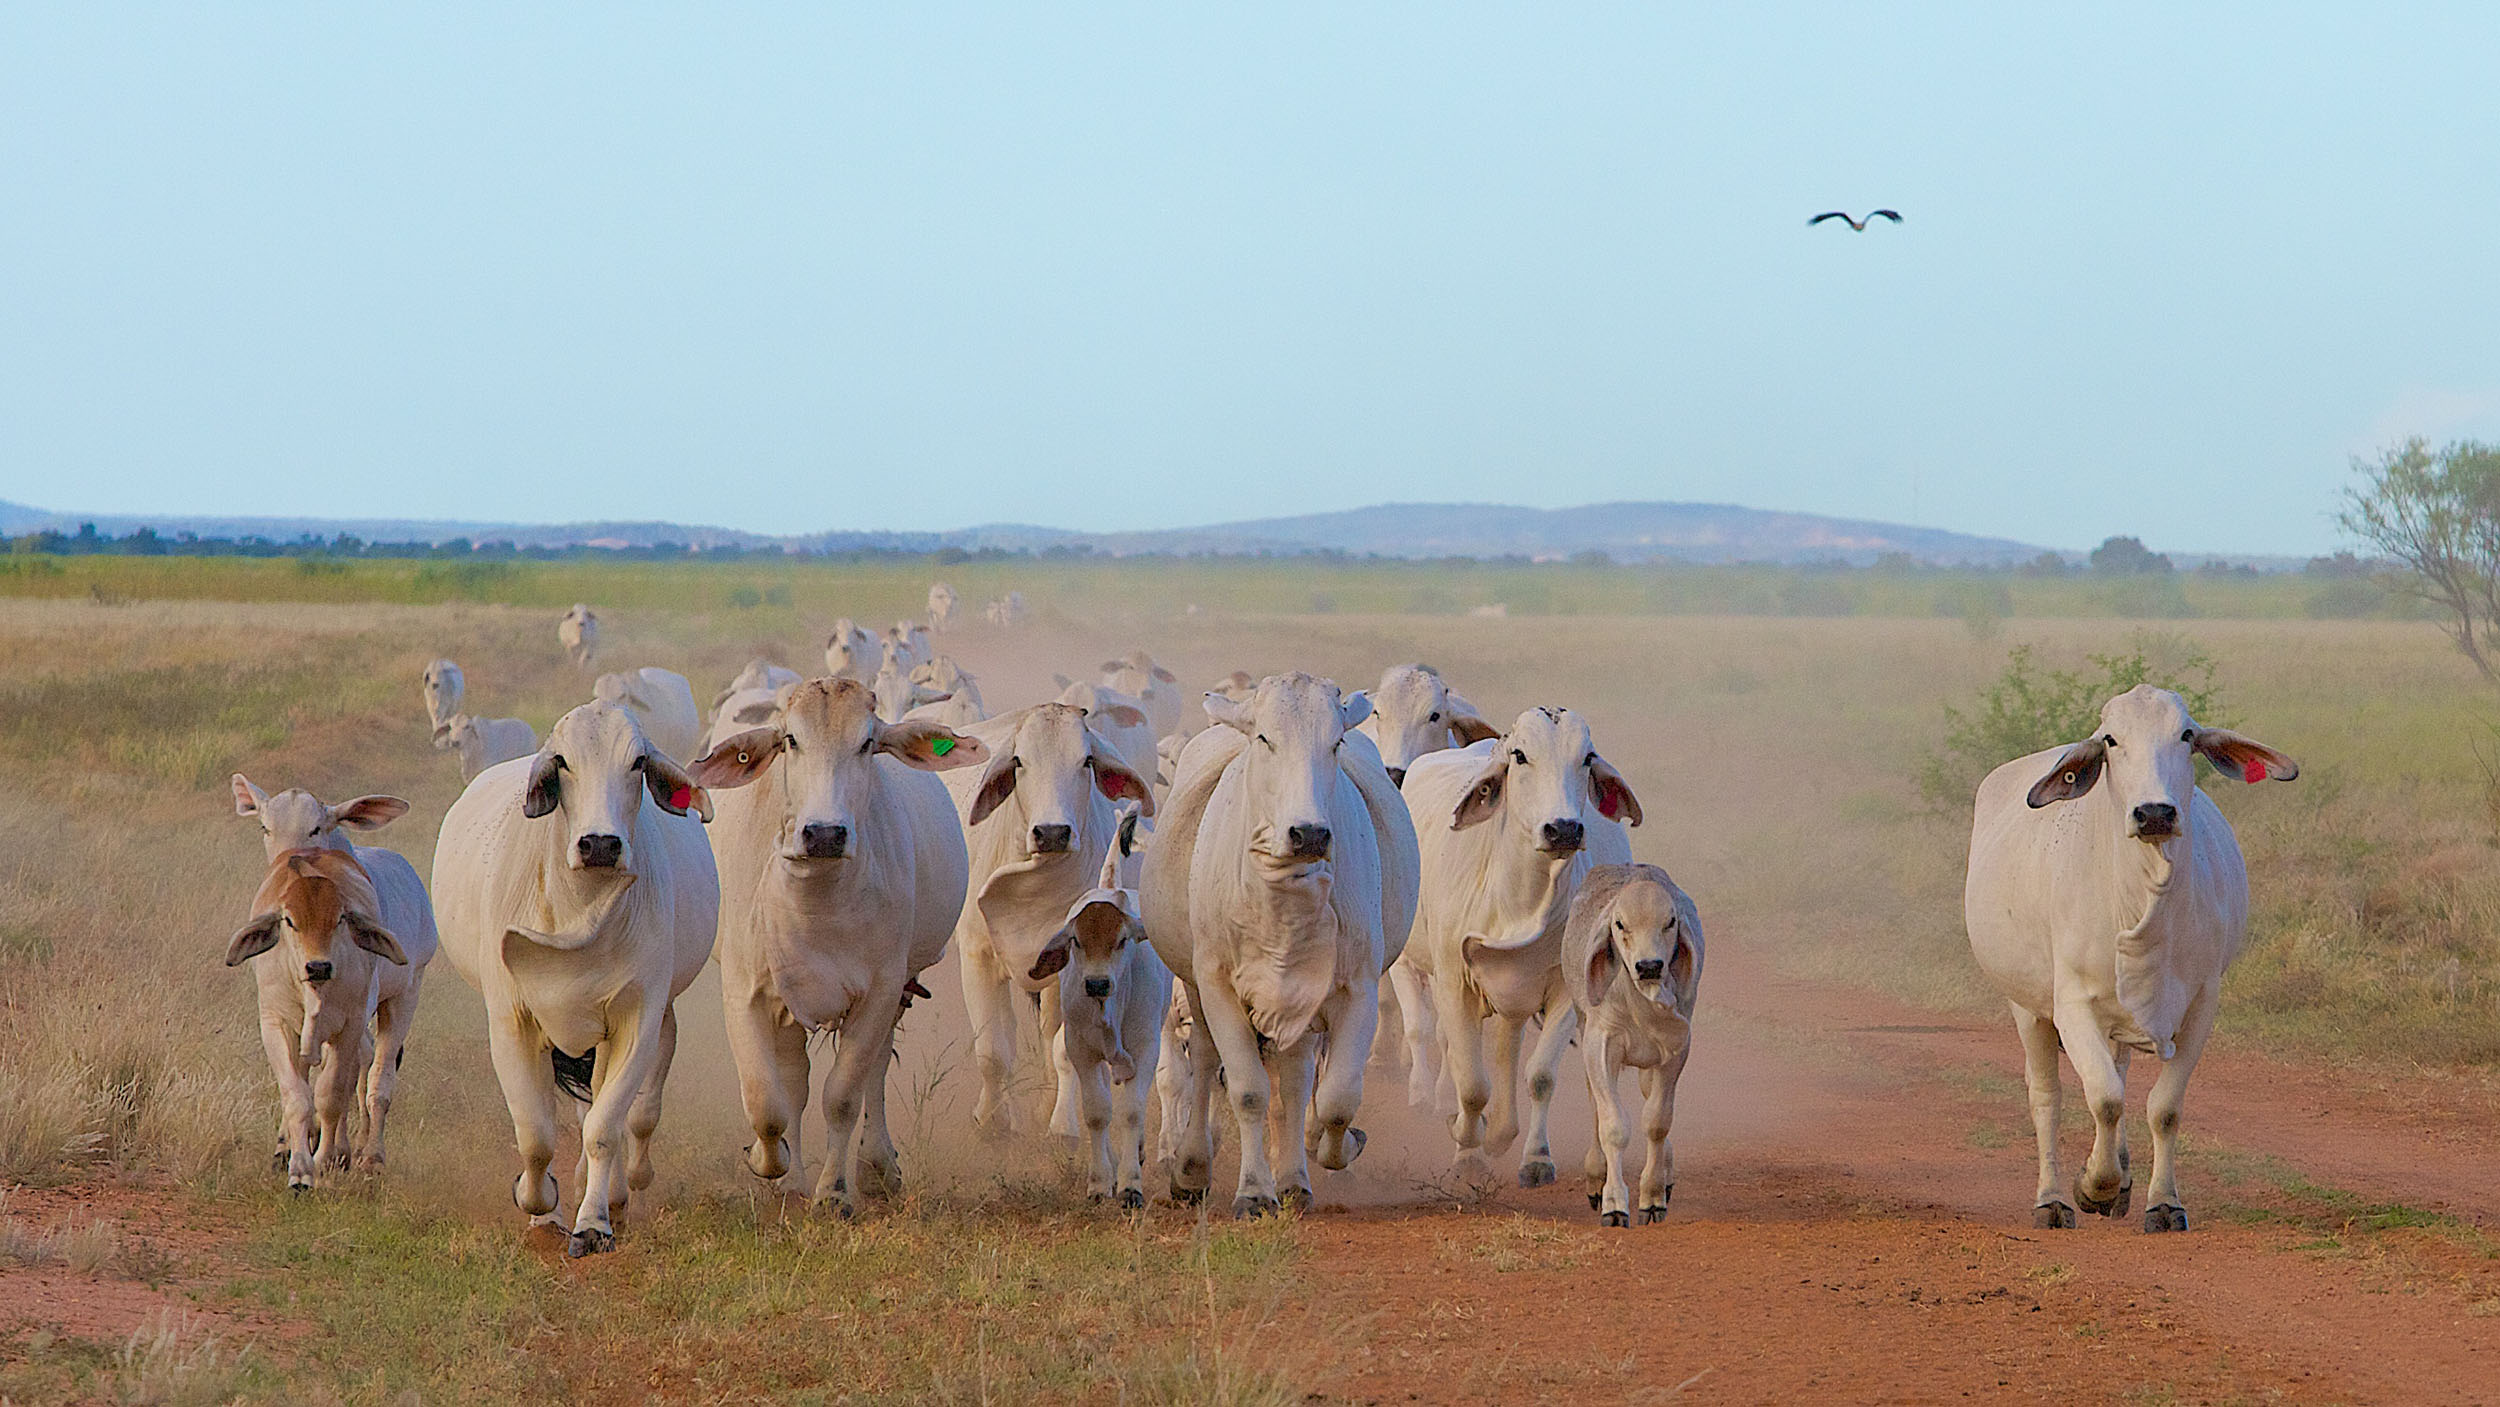 Pastoralism is the most extensive land use across the Outback, with states and territories issuing long-term leases over crown land. Beef cattle are the dominant livestock, with some areas also farming sheep and goats. These Brahman cattle are on the floodplain of the Thomson River in Outback Queensland.